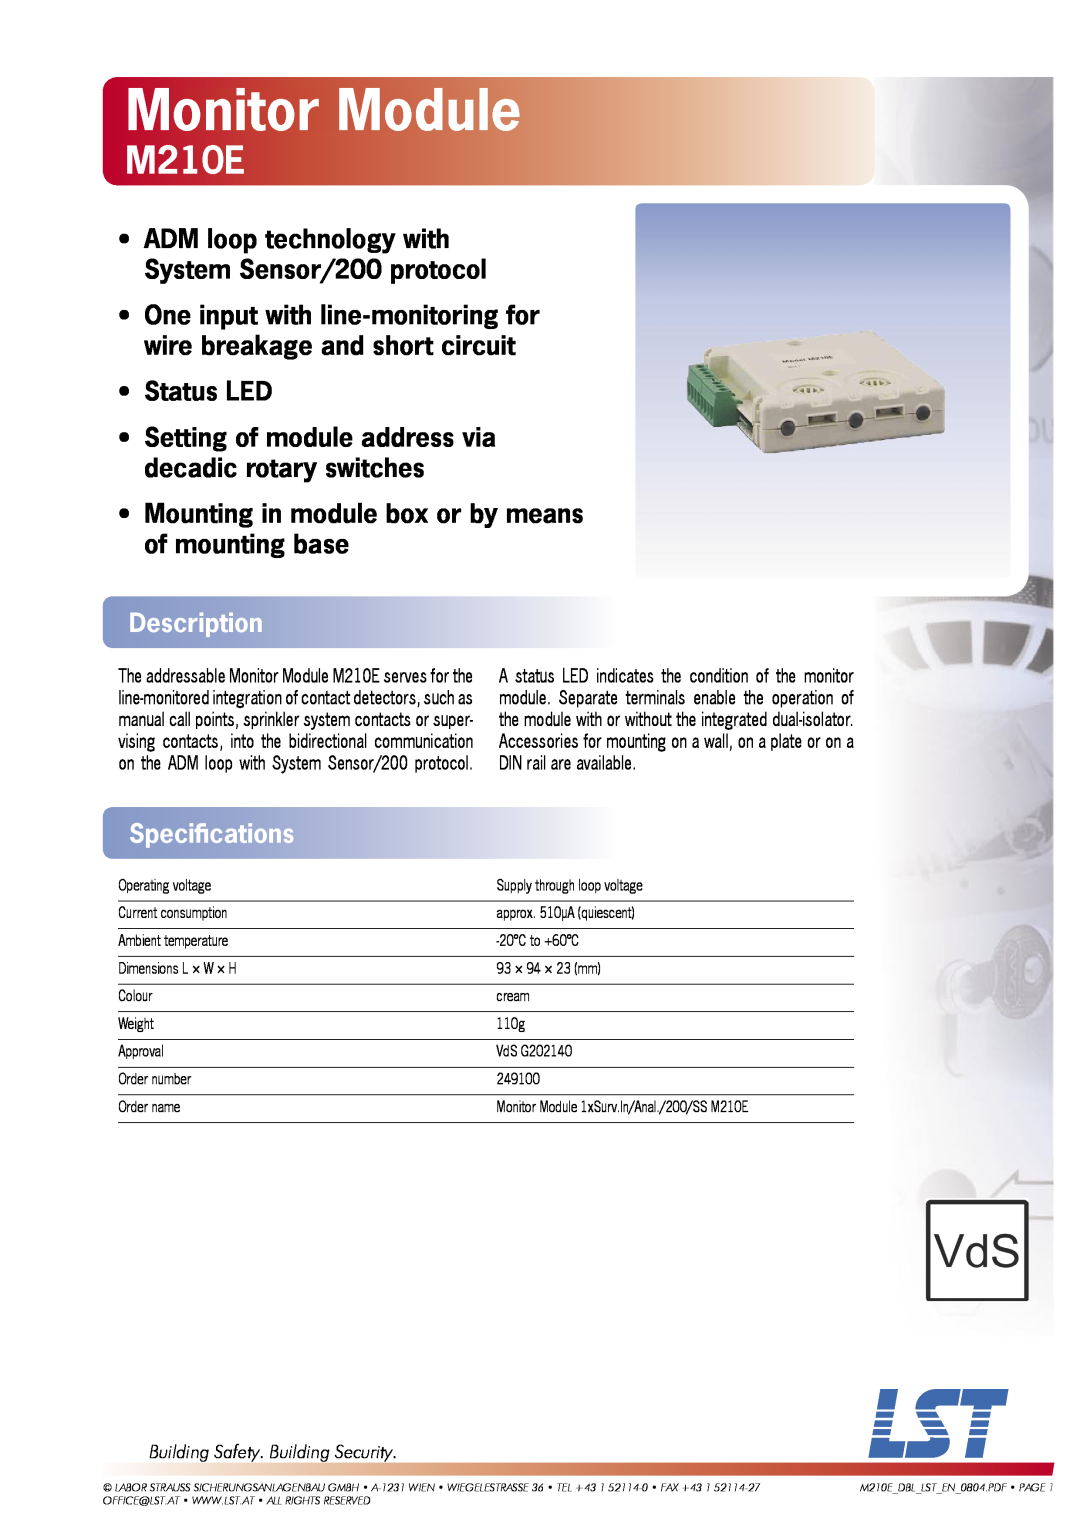 LST M210E specifications Monitor Module, Description, Speciﬁcations 